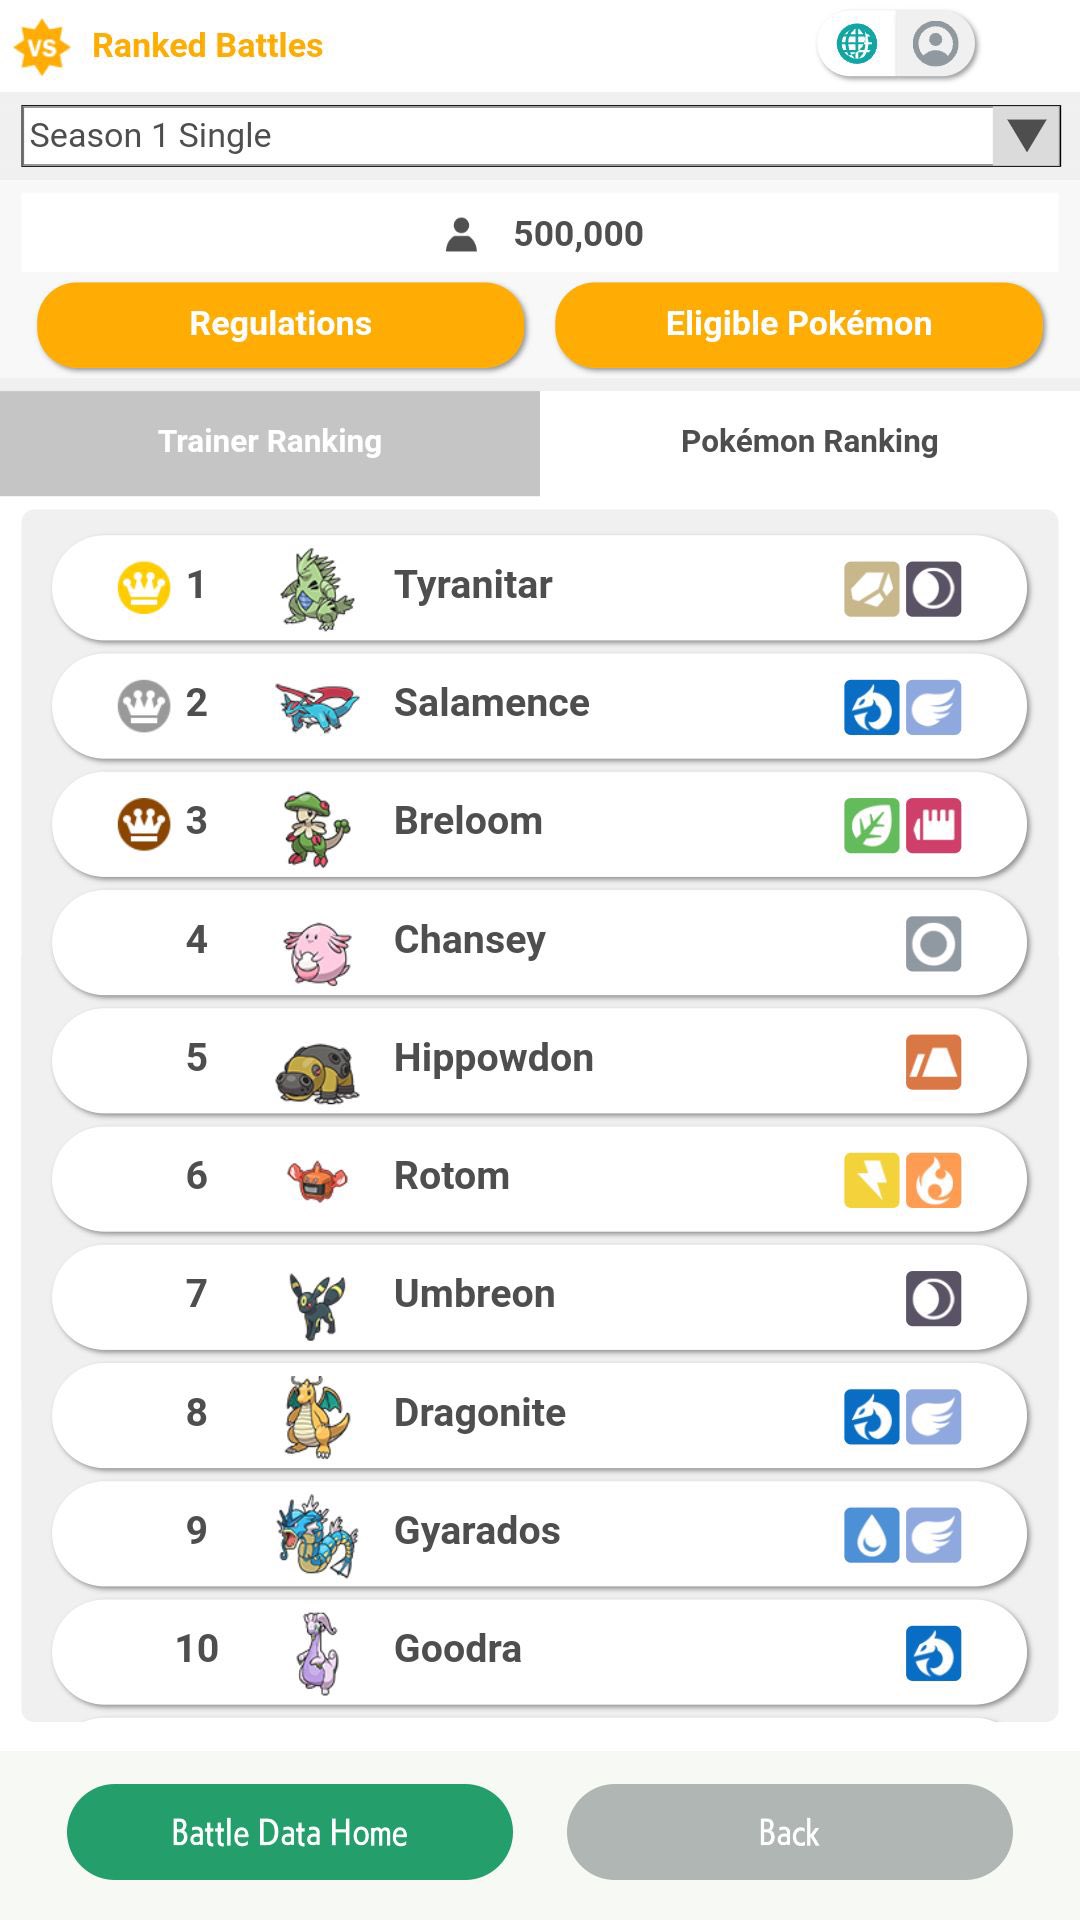 Pokemon Home  News on X: The latest Battle Stadium statistics from Pokémon  Scarlet and Pokémon Violet will soon be viewable in the mobile device  version of Pokémon HOME! From the app